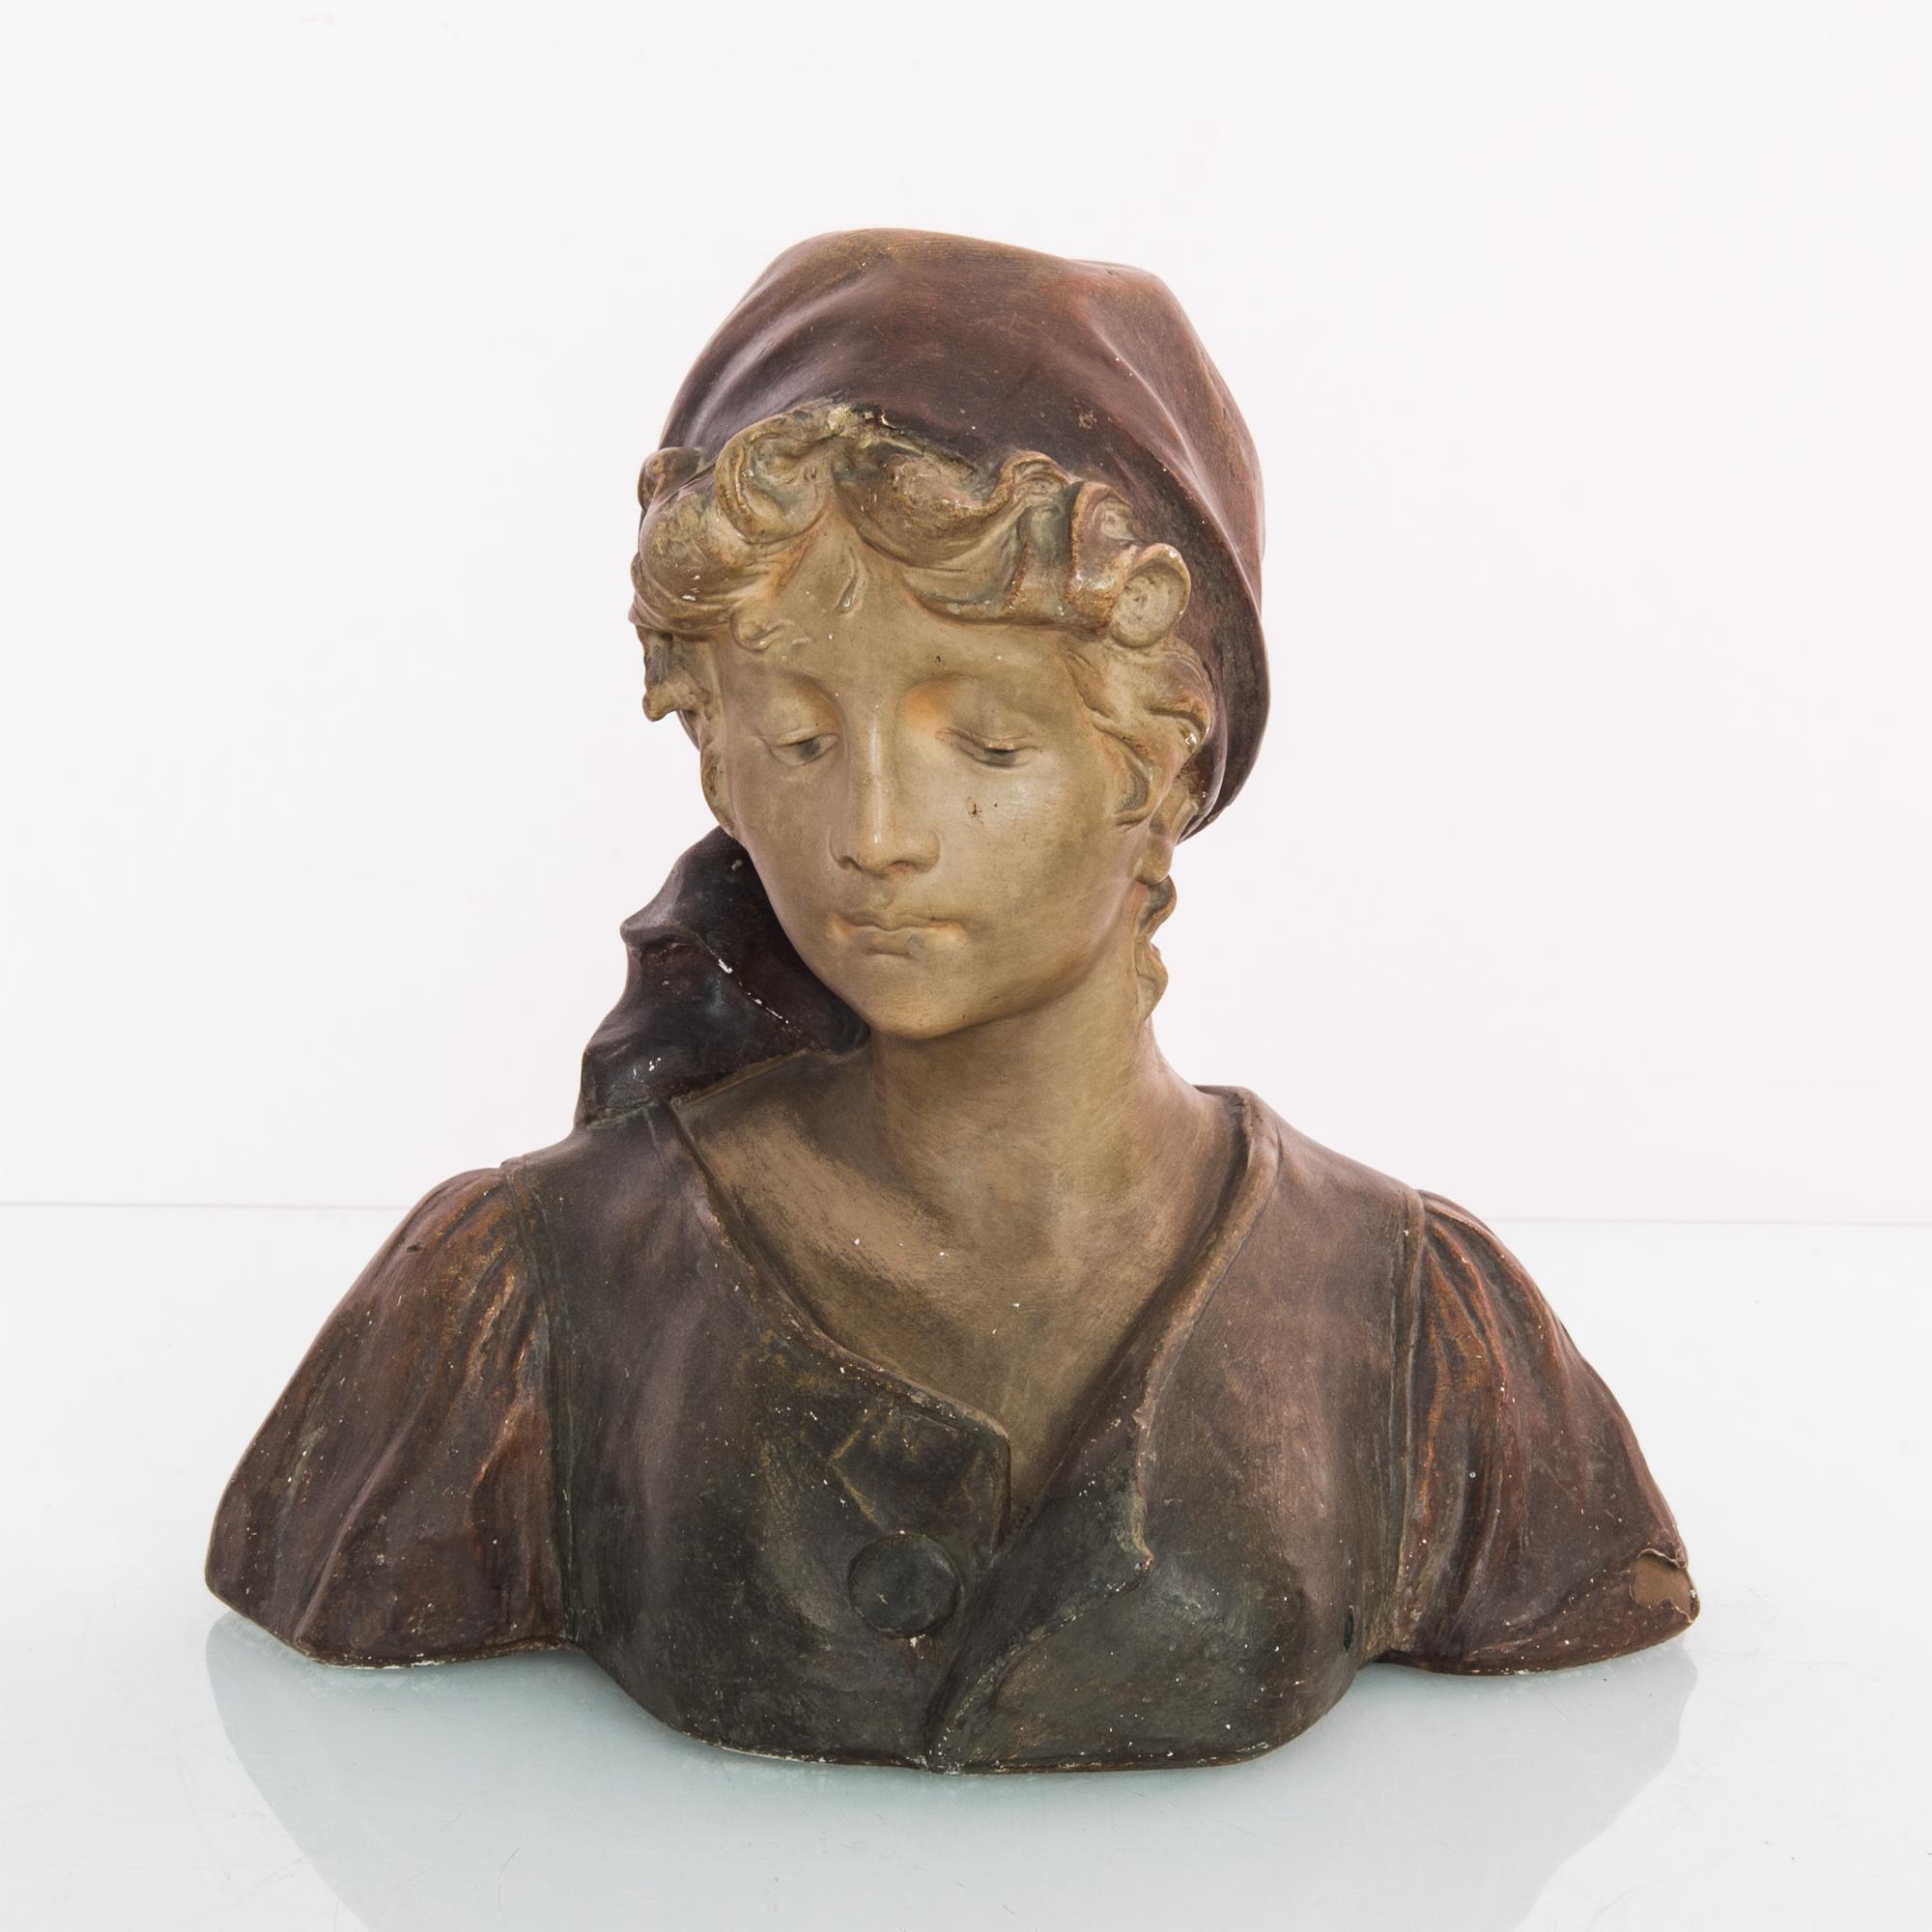 This ceramic bust was made in France, circa 1920. The refined sculpture shows a young woman, with a scarf covering her hair. A dour pose shows her looking down, in contemplation, with a beautiful beige and dark brown patina patina.